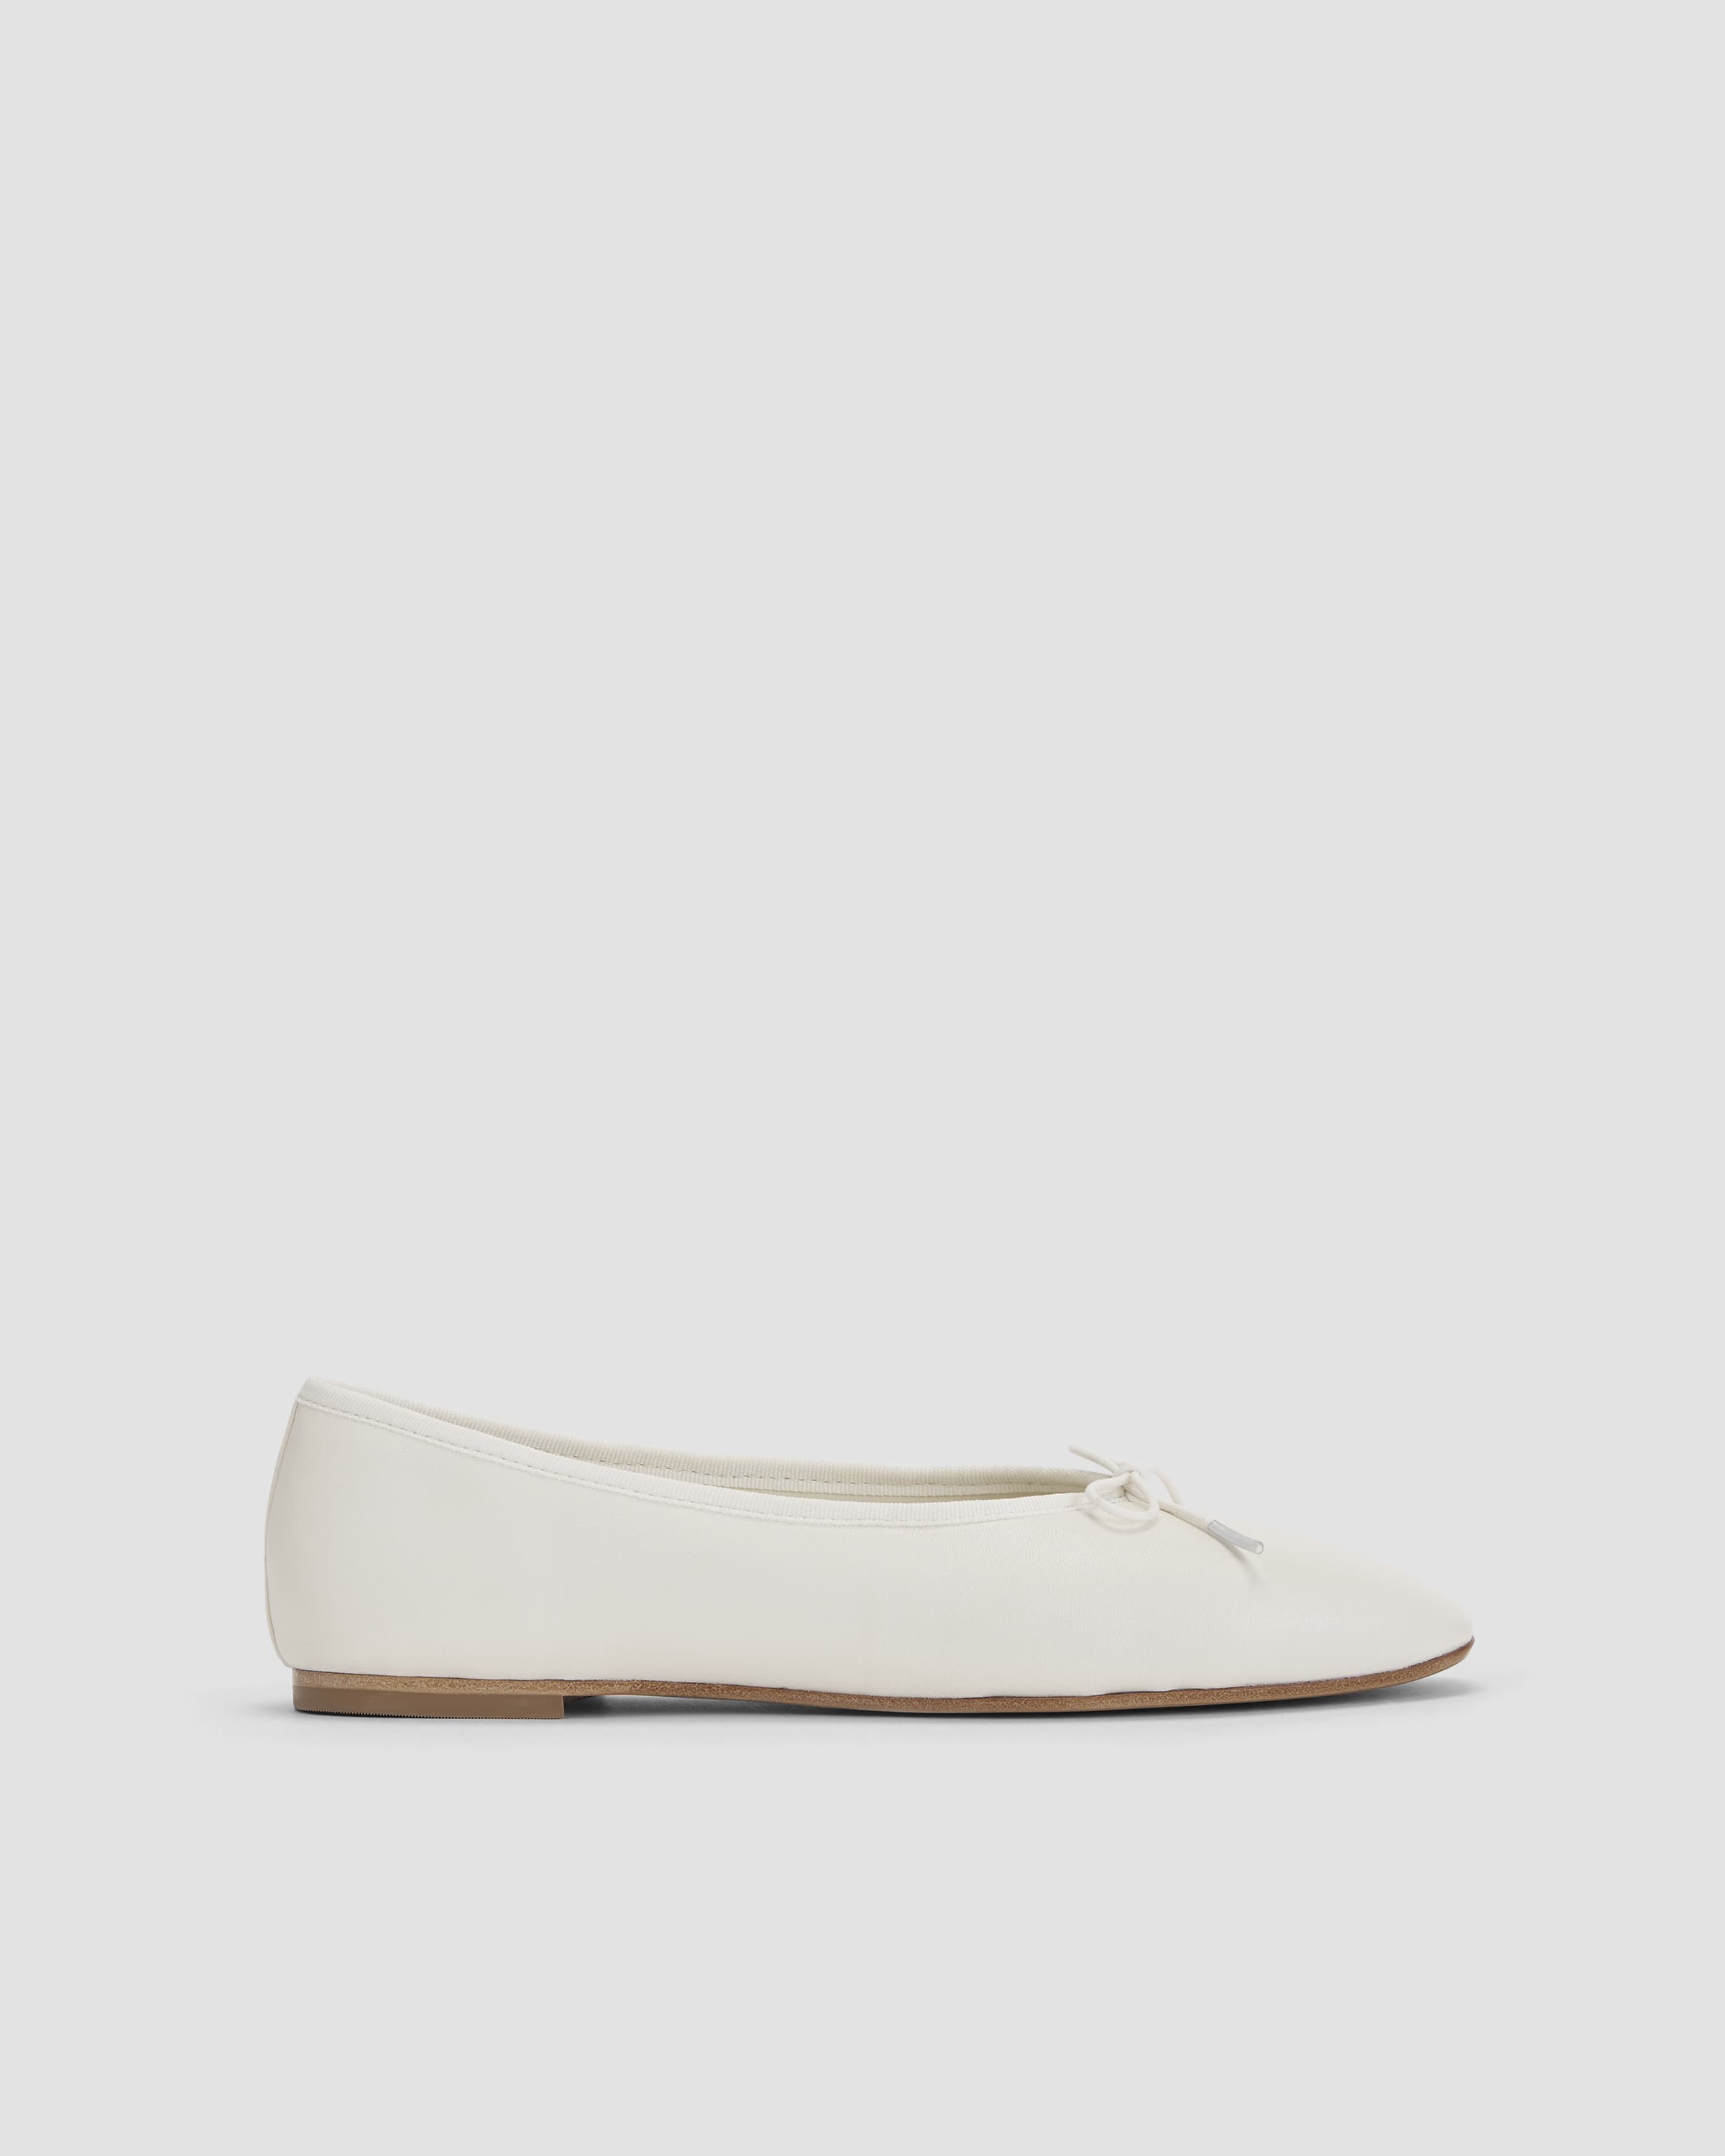 The Day Ballet Flat Canvas – Everlane